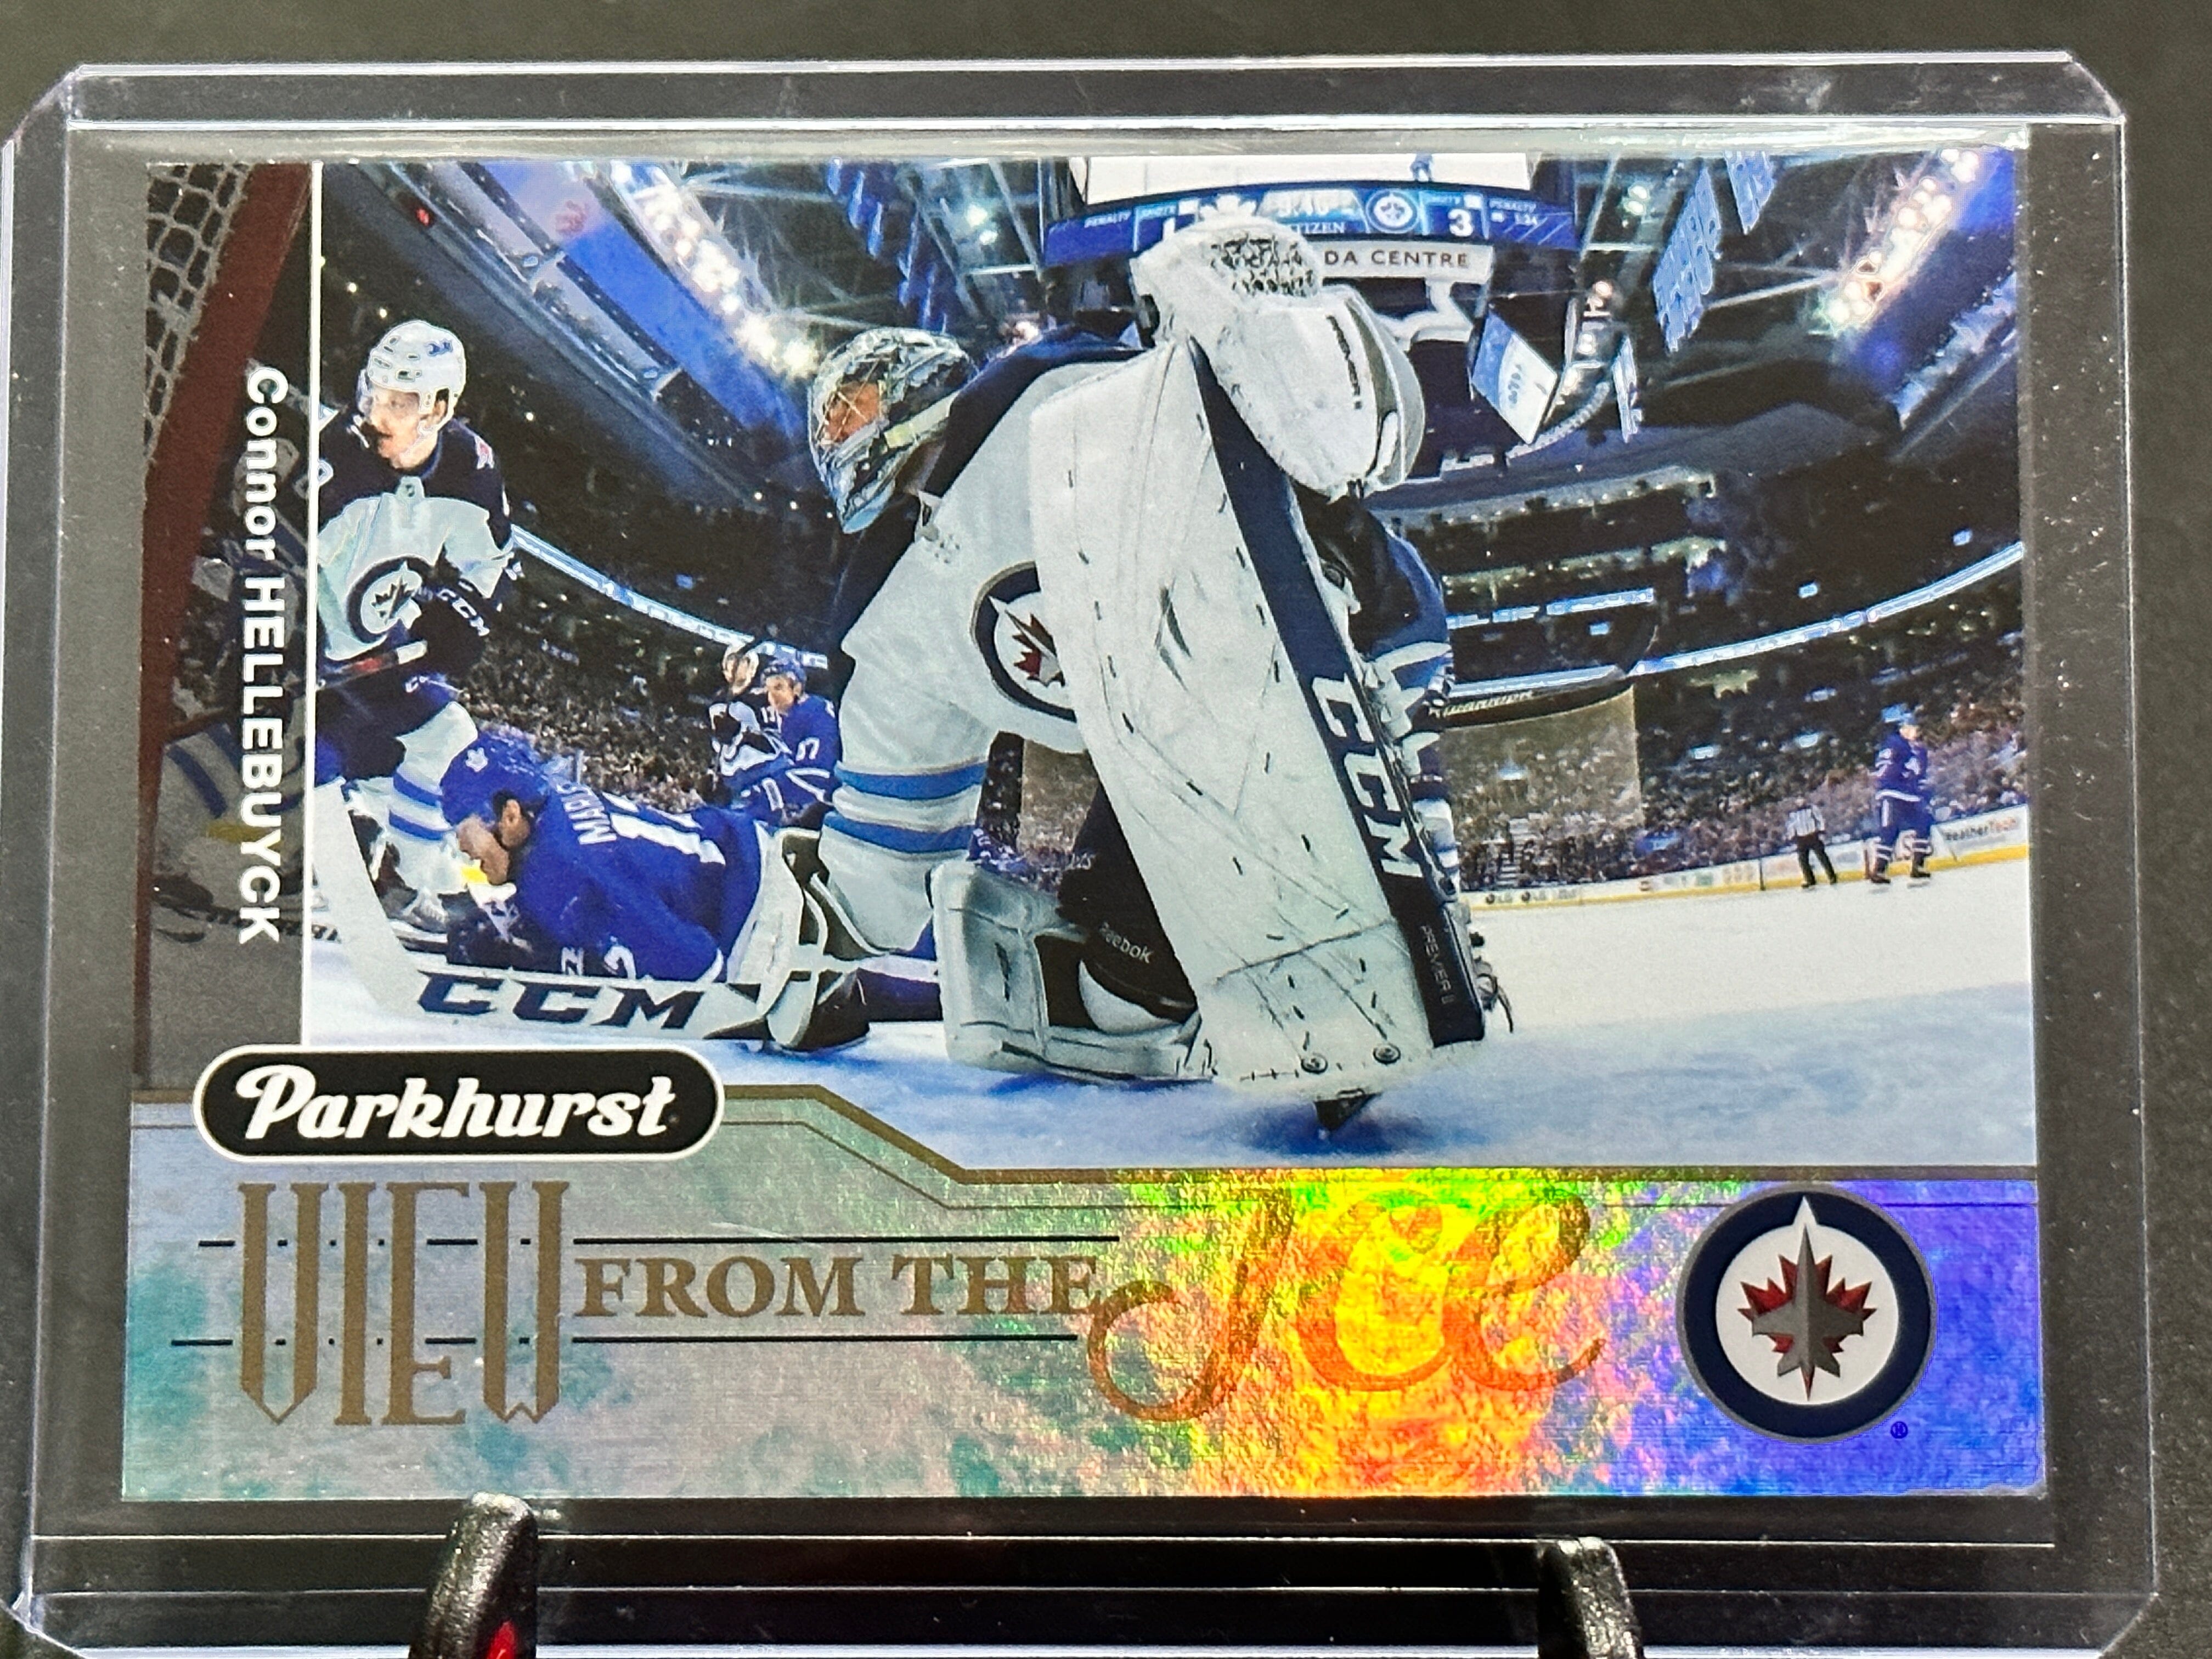 2018-2019 Parkhurst Connor Hellebuyck View From The Ice #Vi-11 Winnipeg Jets Shootnscore.com 